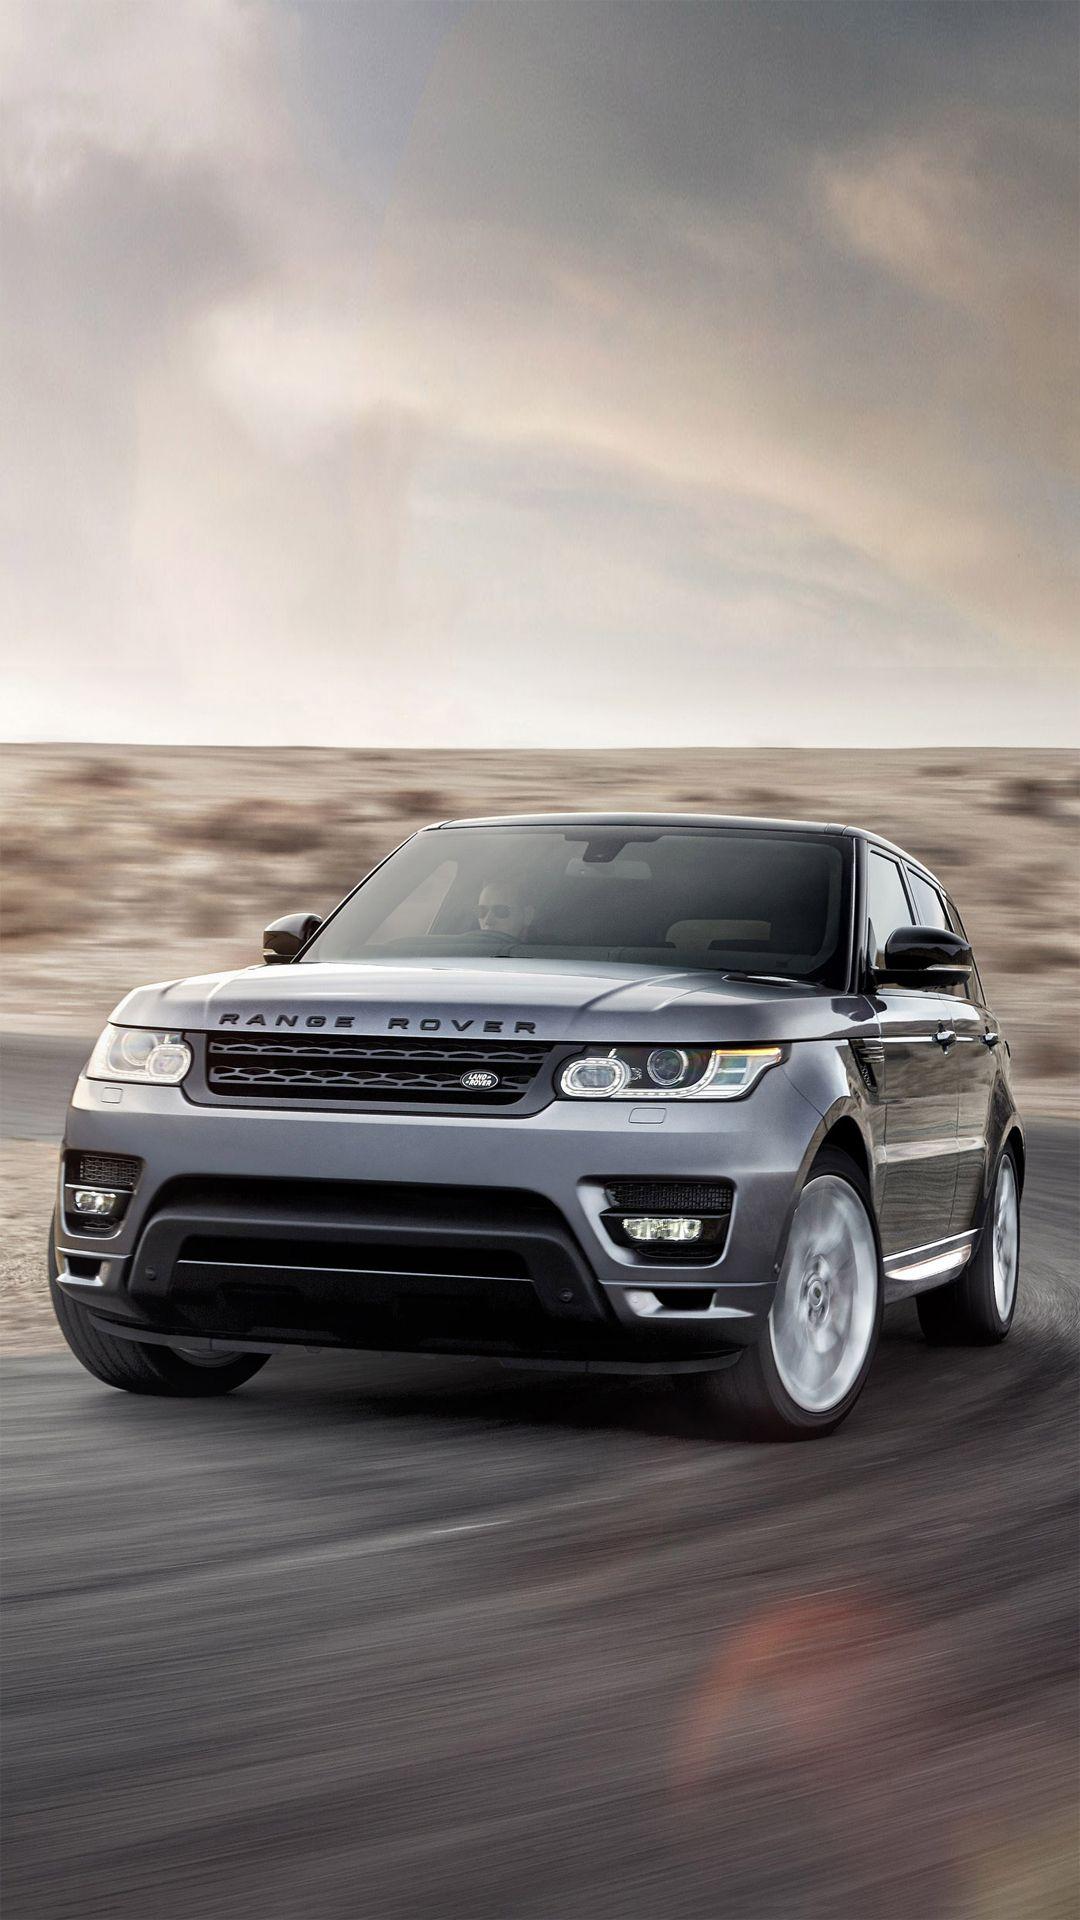 Range Rover sport htc one wallpaper, free and easy to